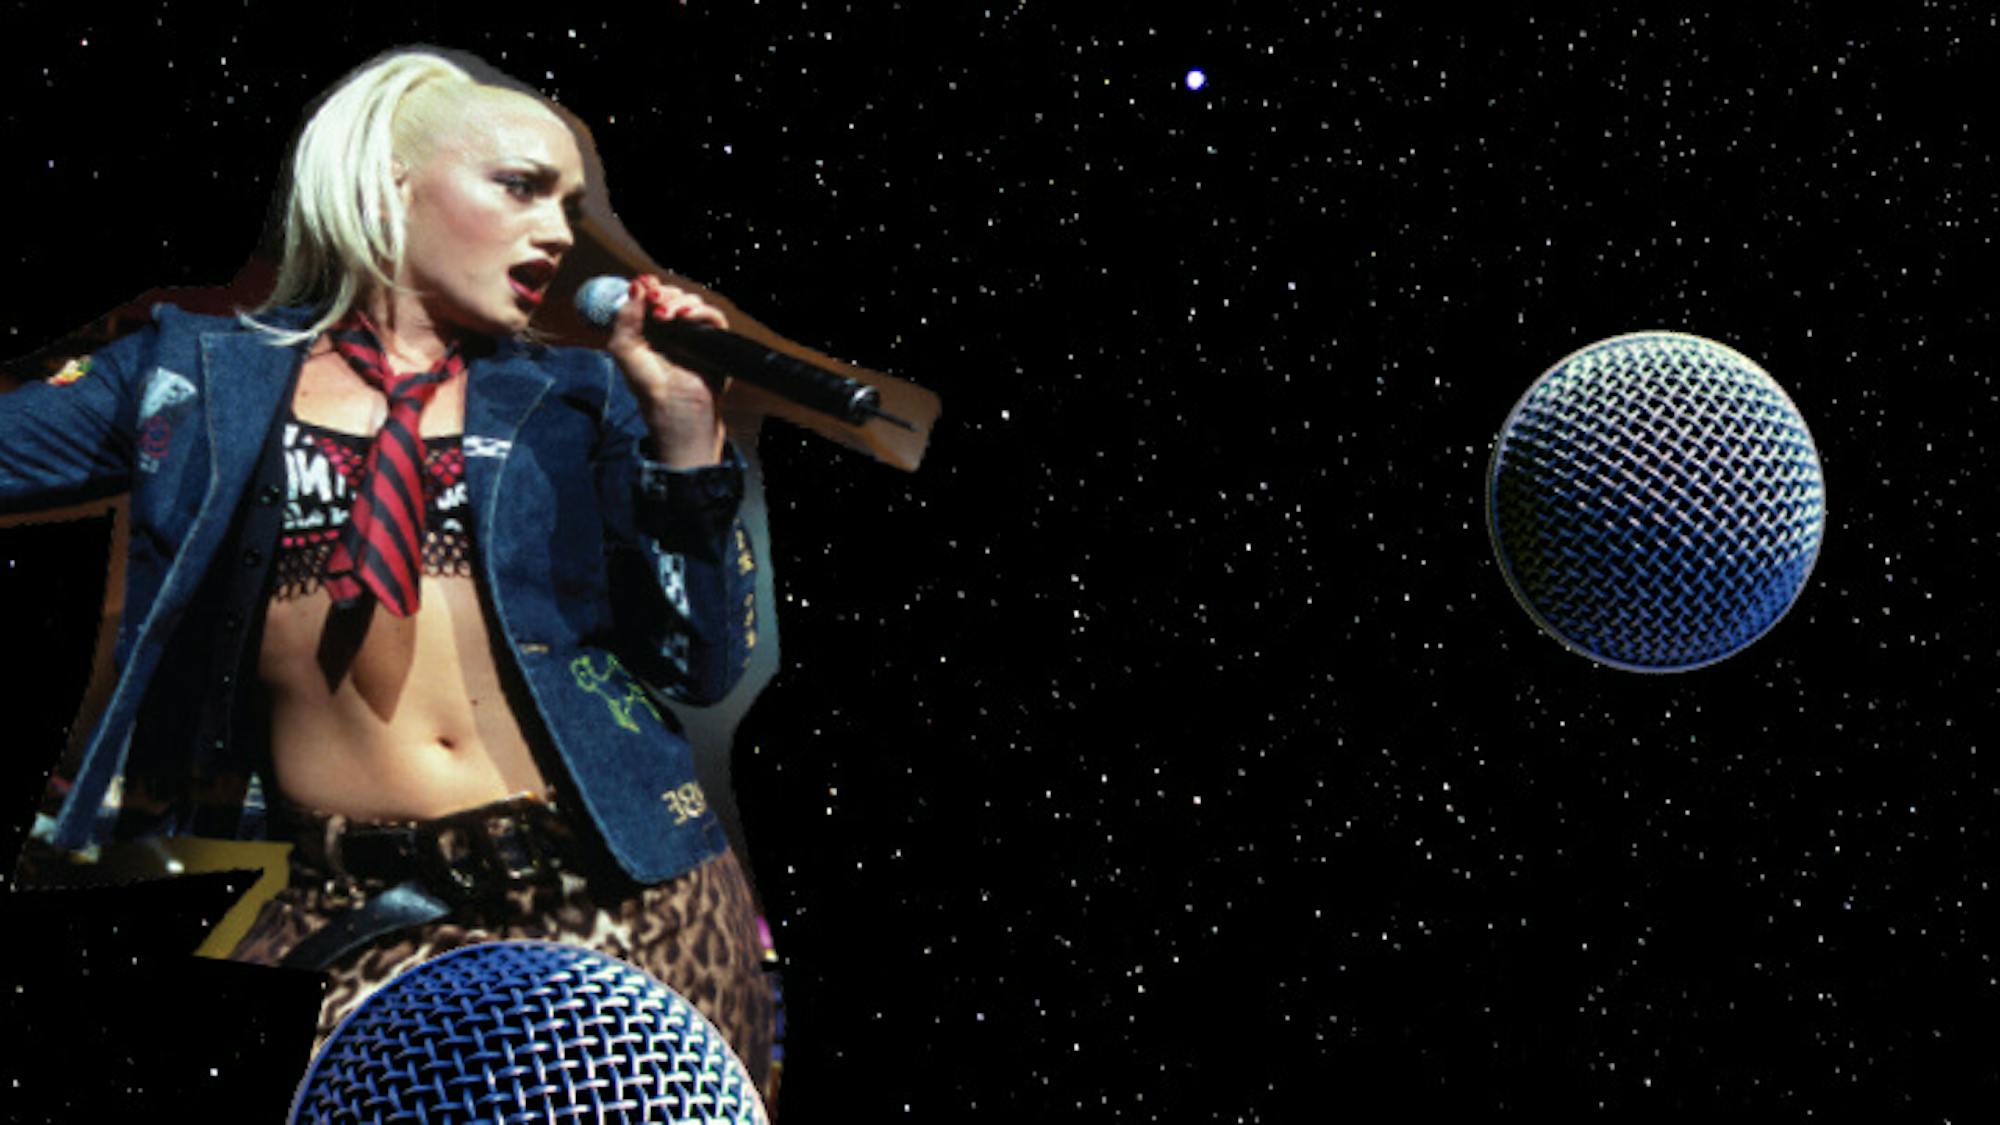 Gwen Stefani wears a short tie, cheetah pants, and leather jacket as she sings in microphone outerspace.